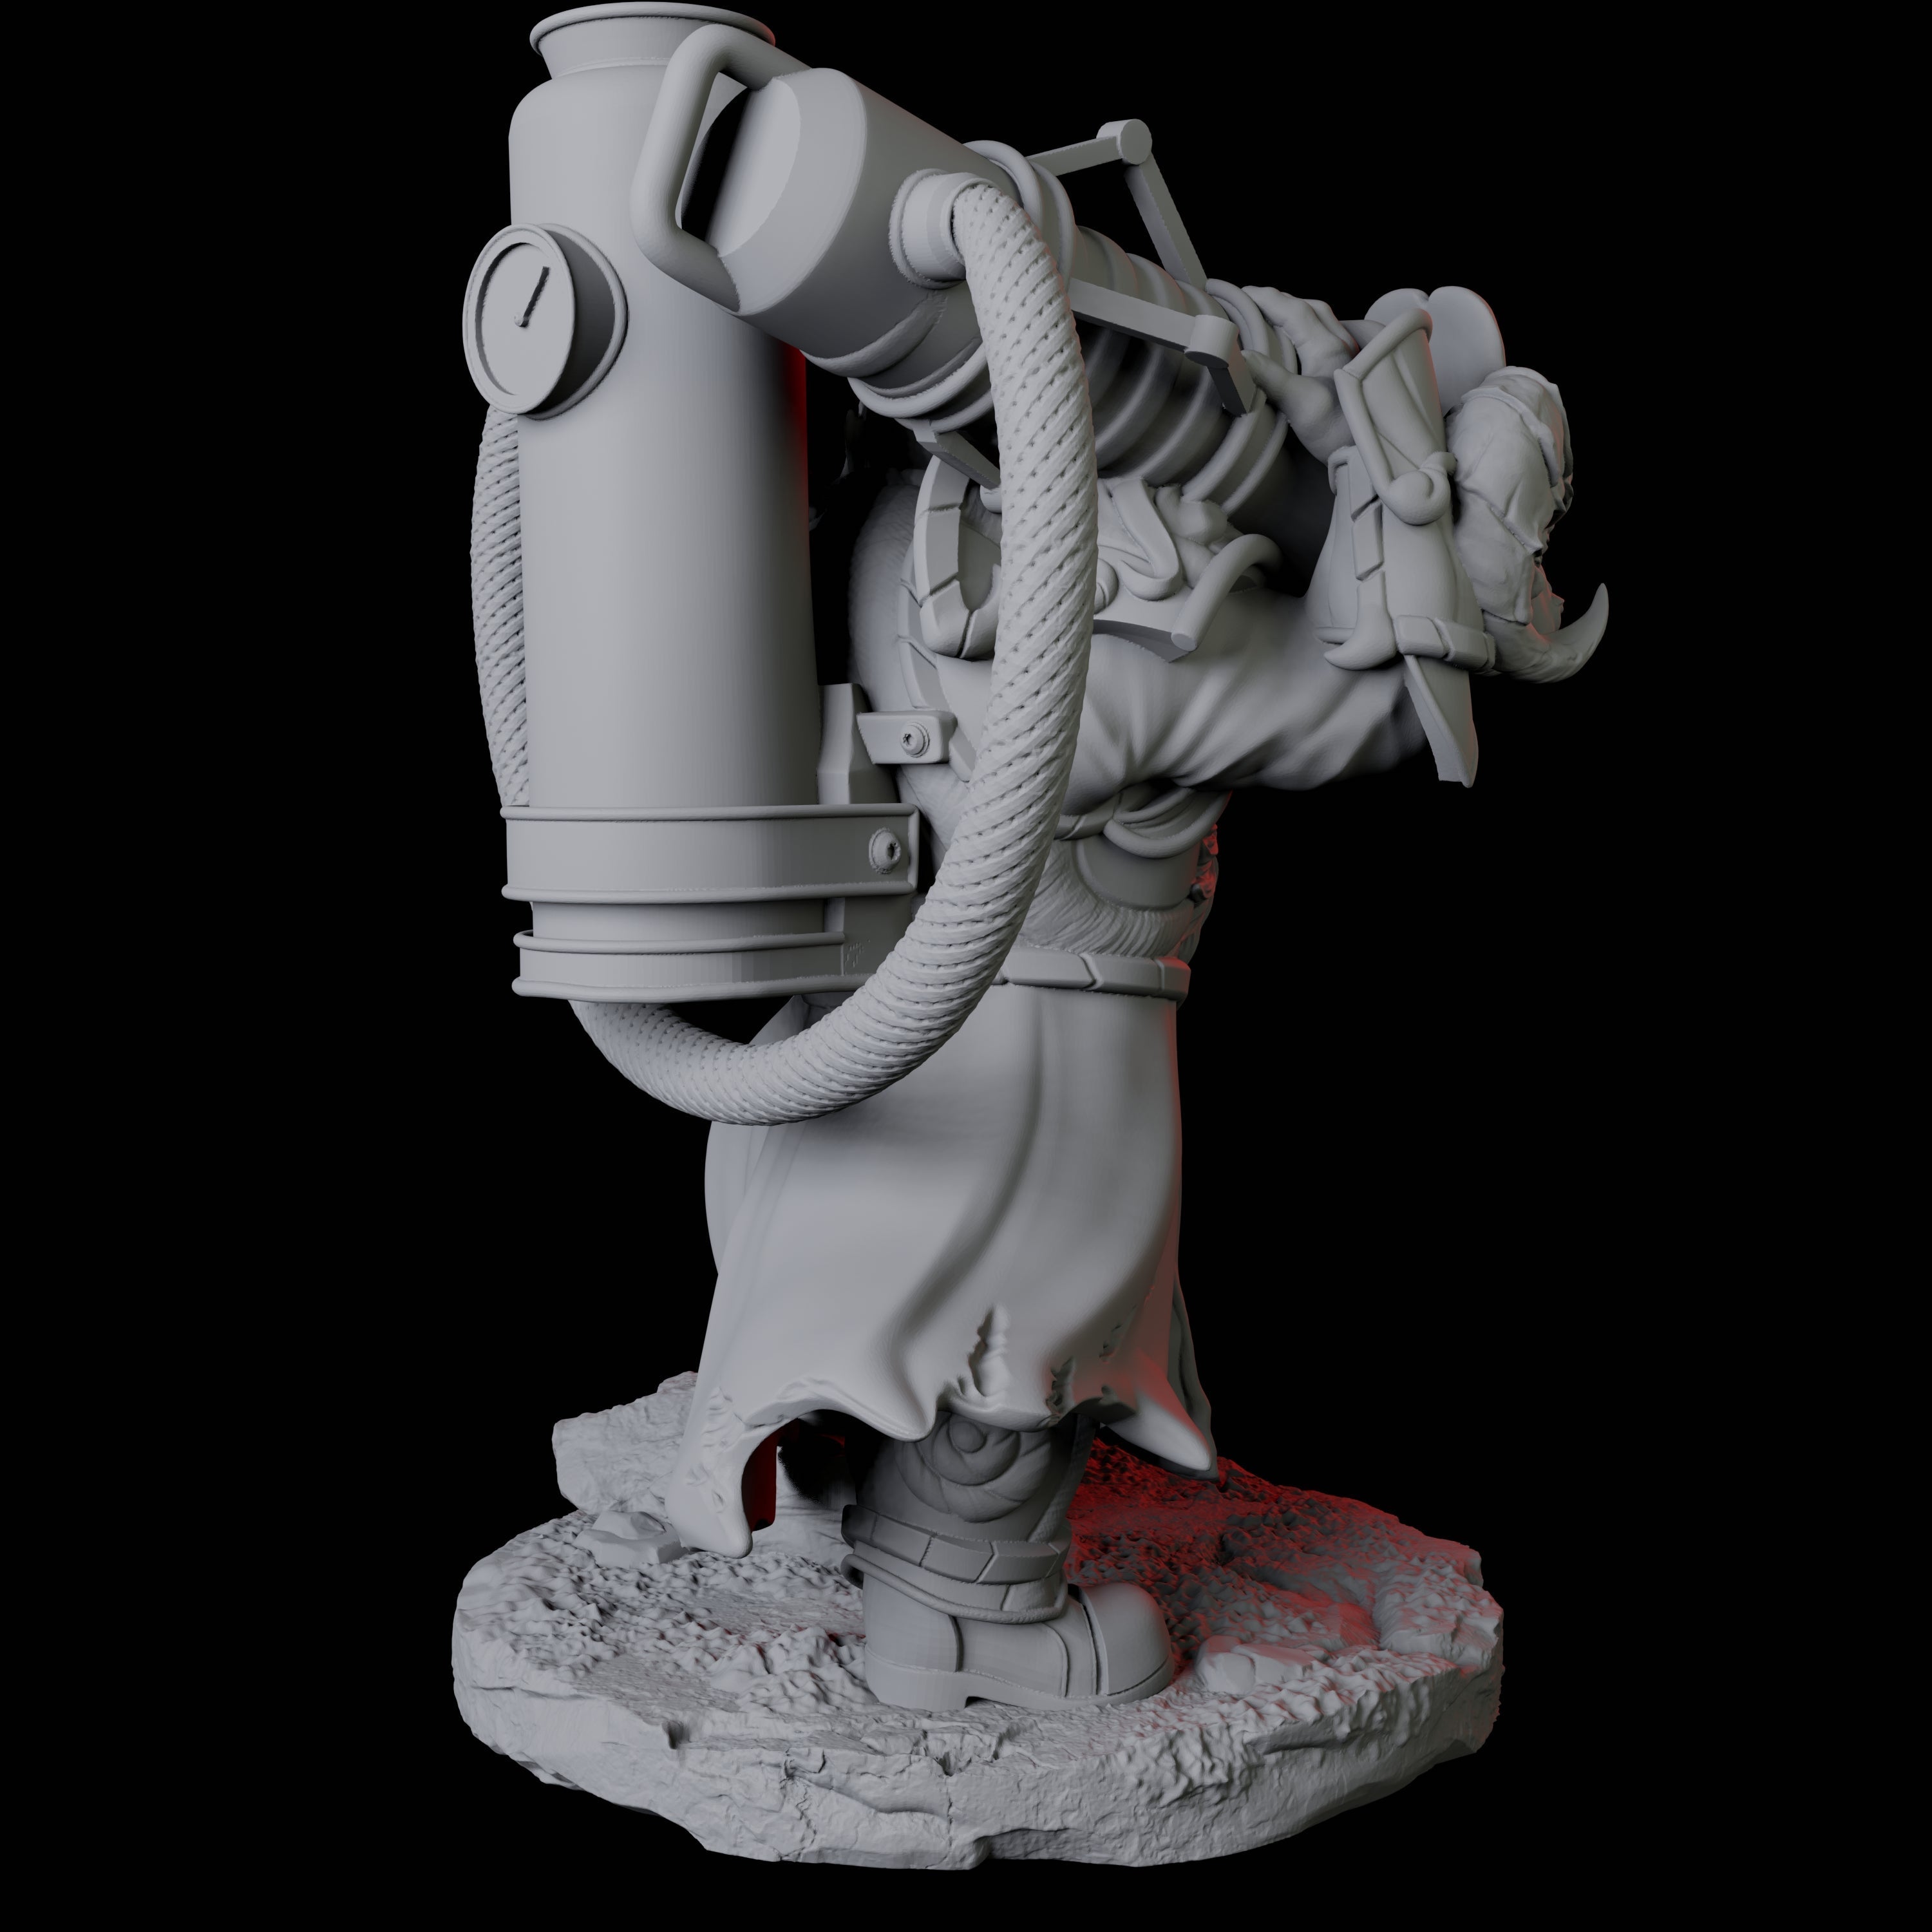 Flamethrower Soldier B Miniature for Dungeons and Dragons, Pathfinder or other TTRPGs